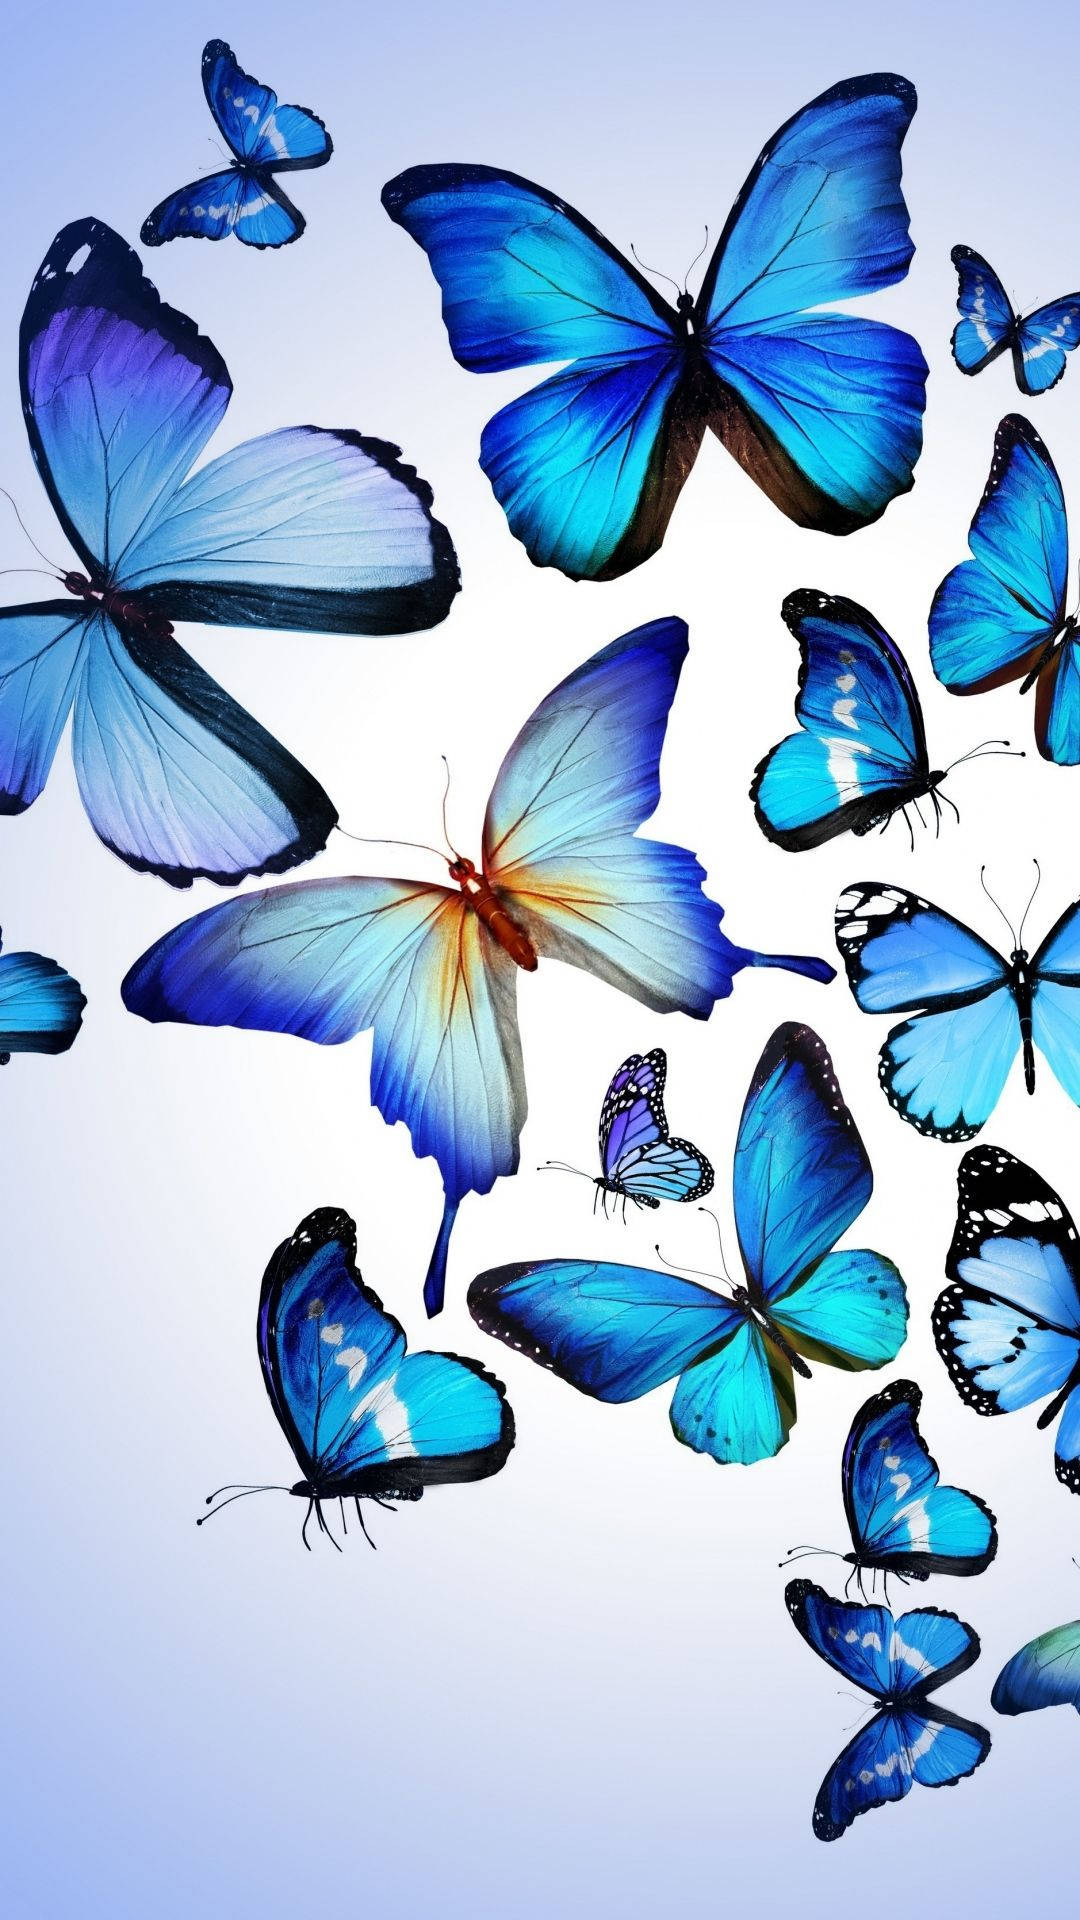 Aesthetic Butterfly Iphone Theme Display Wallpaper